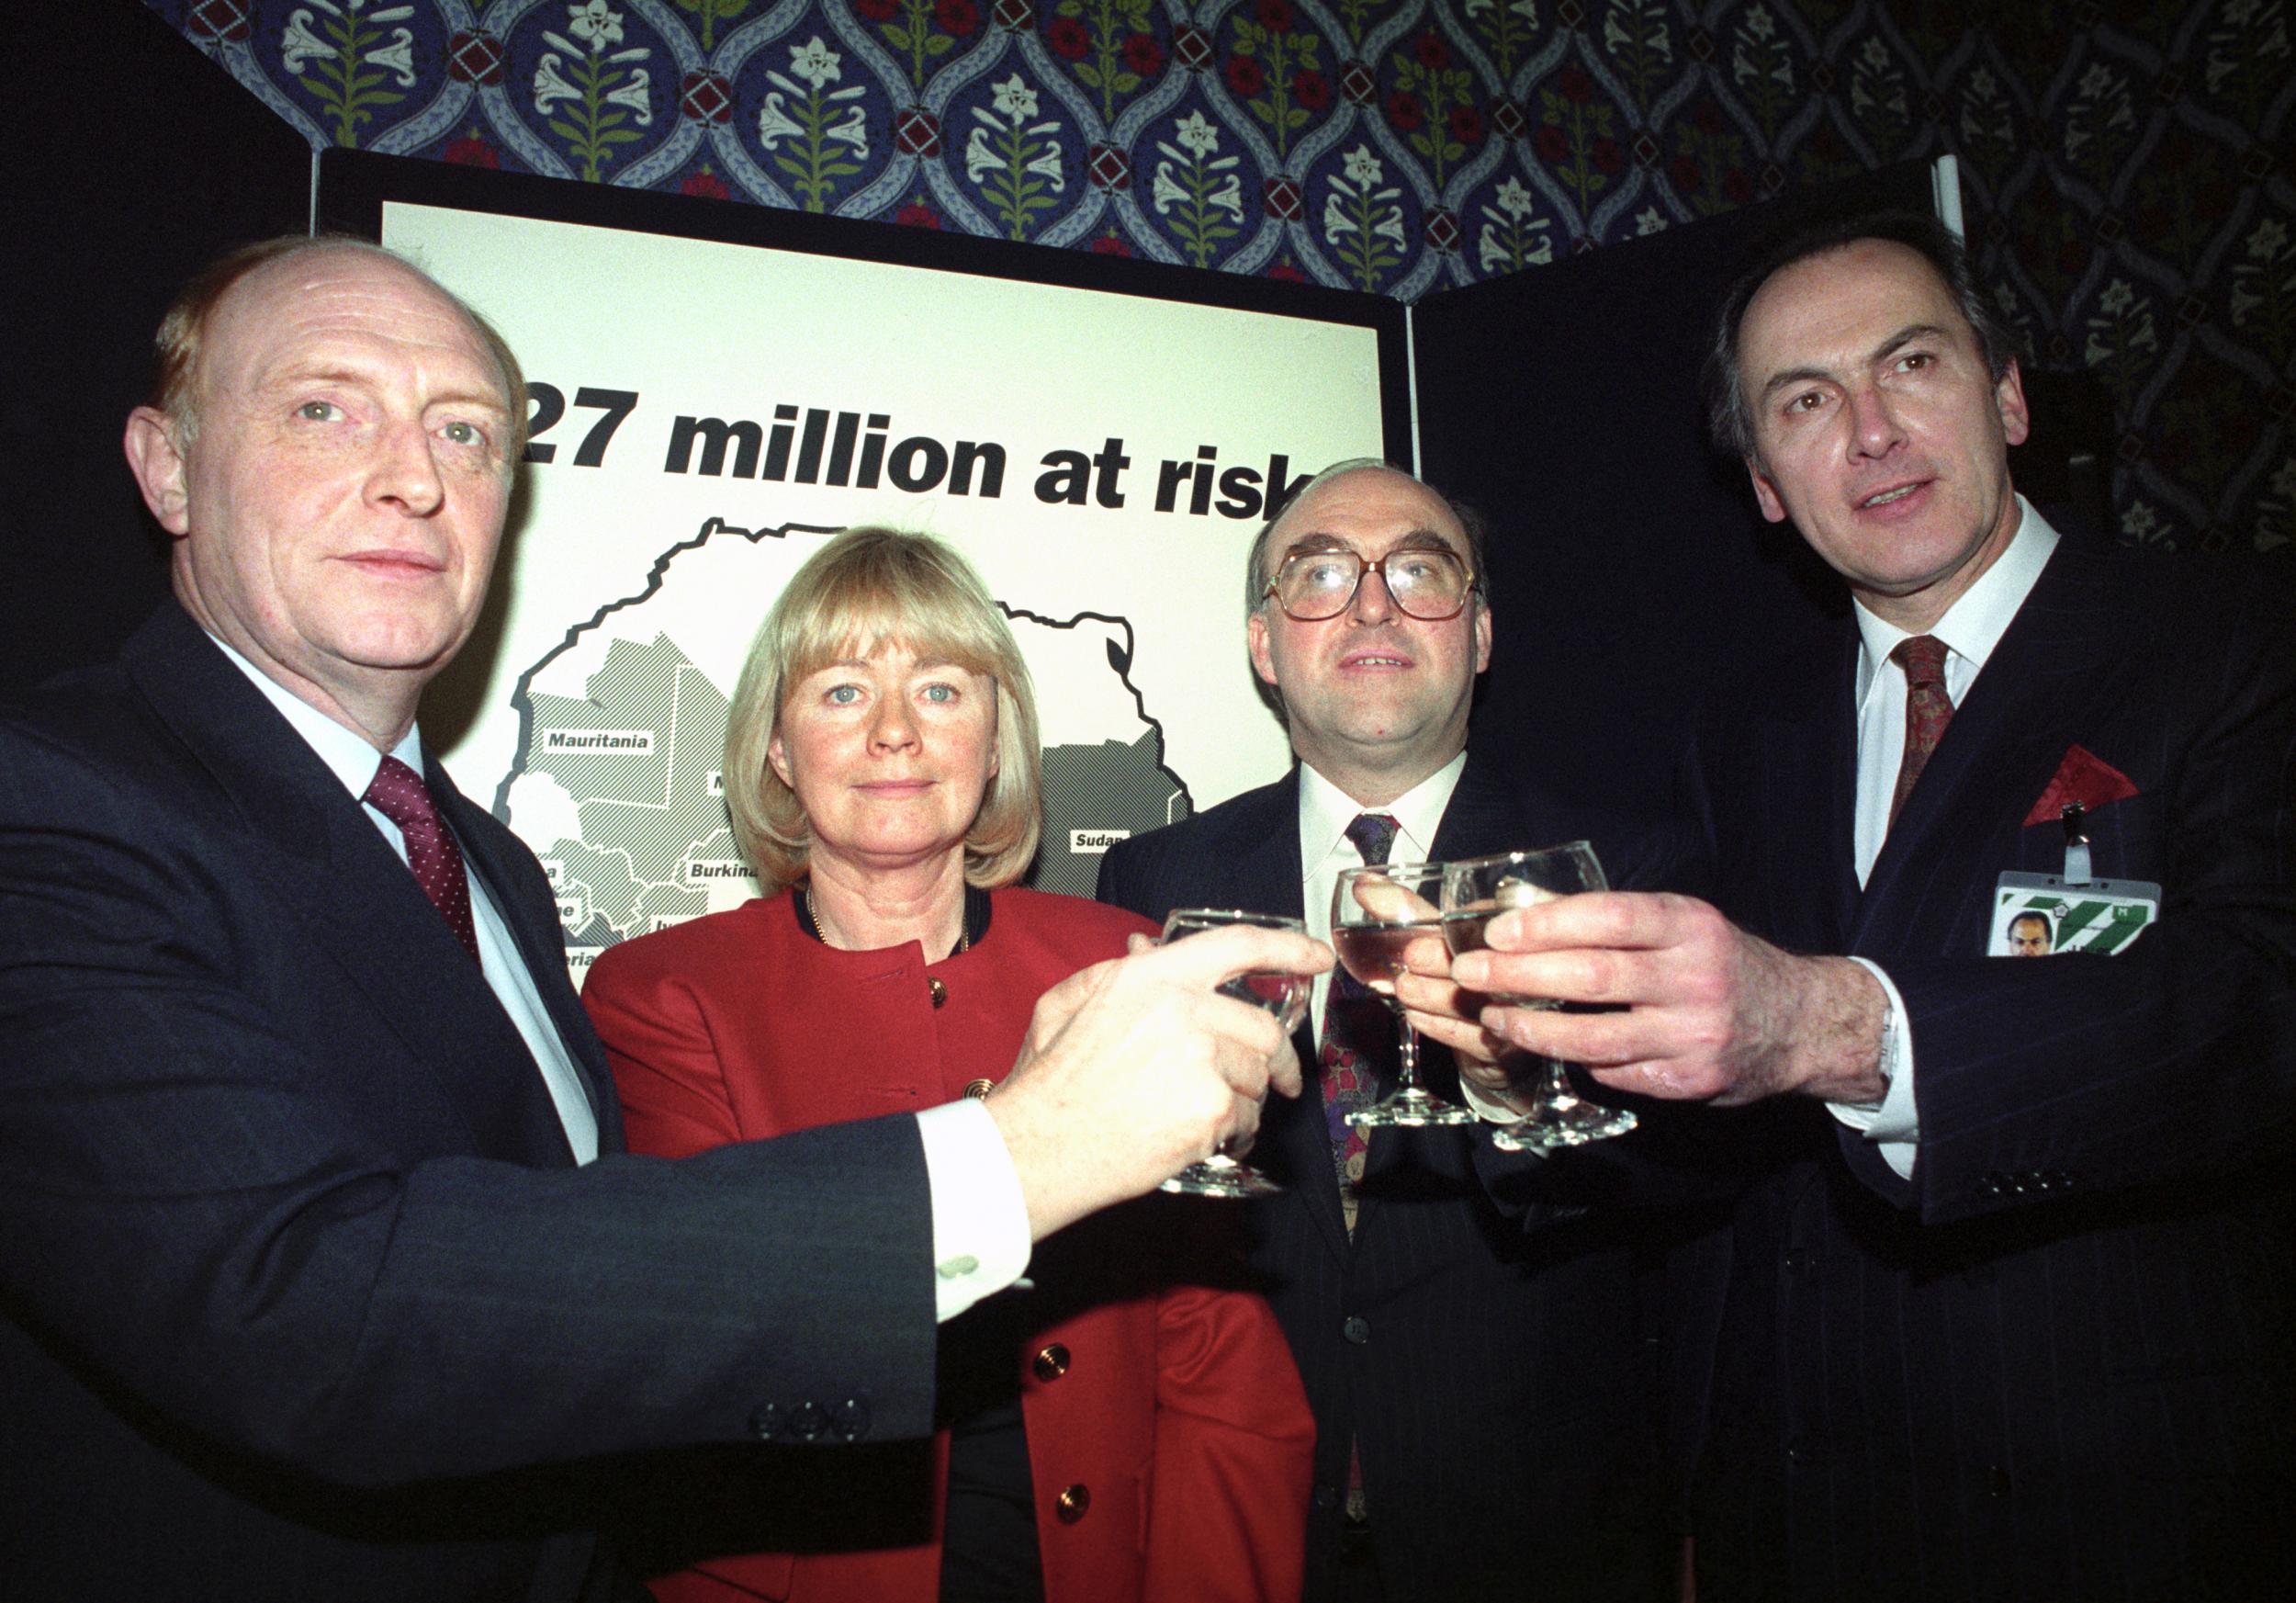 With Neil Kinnock, Anne Clwyd and Jack Cunningham in 1991